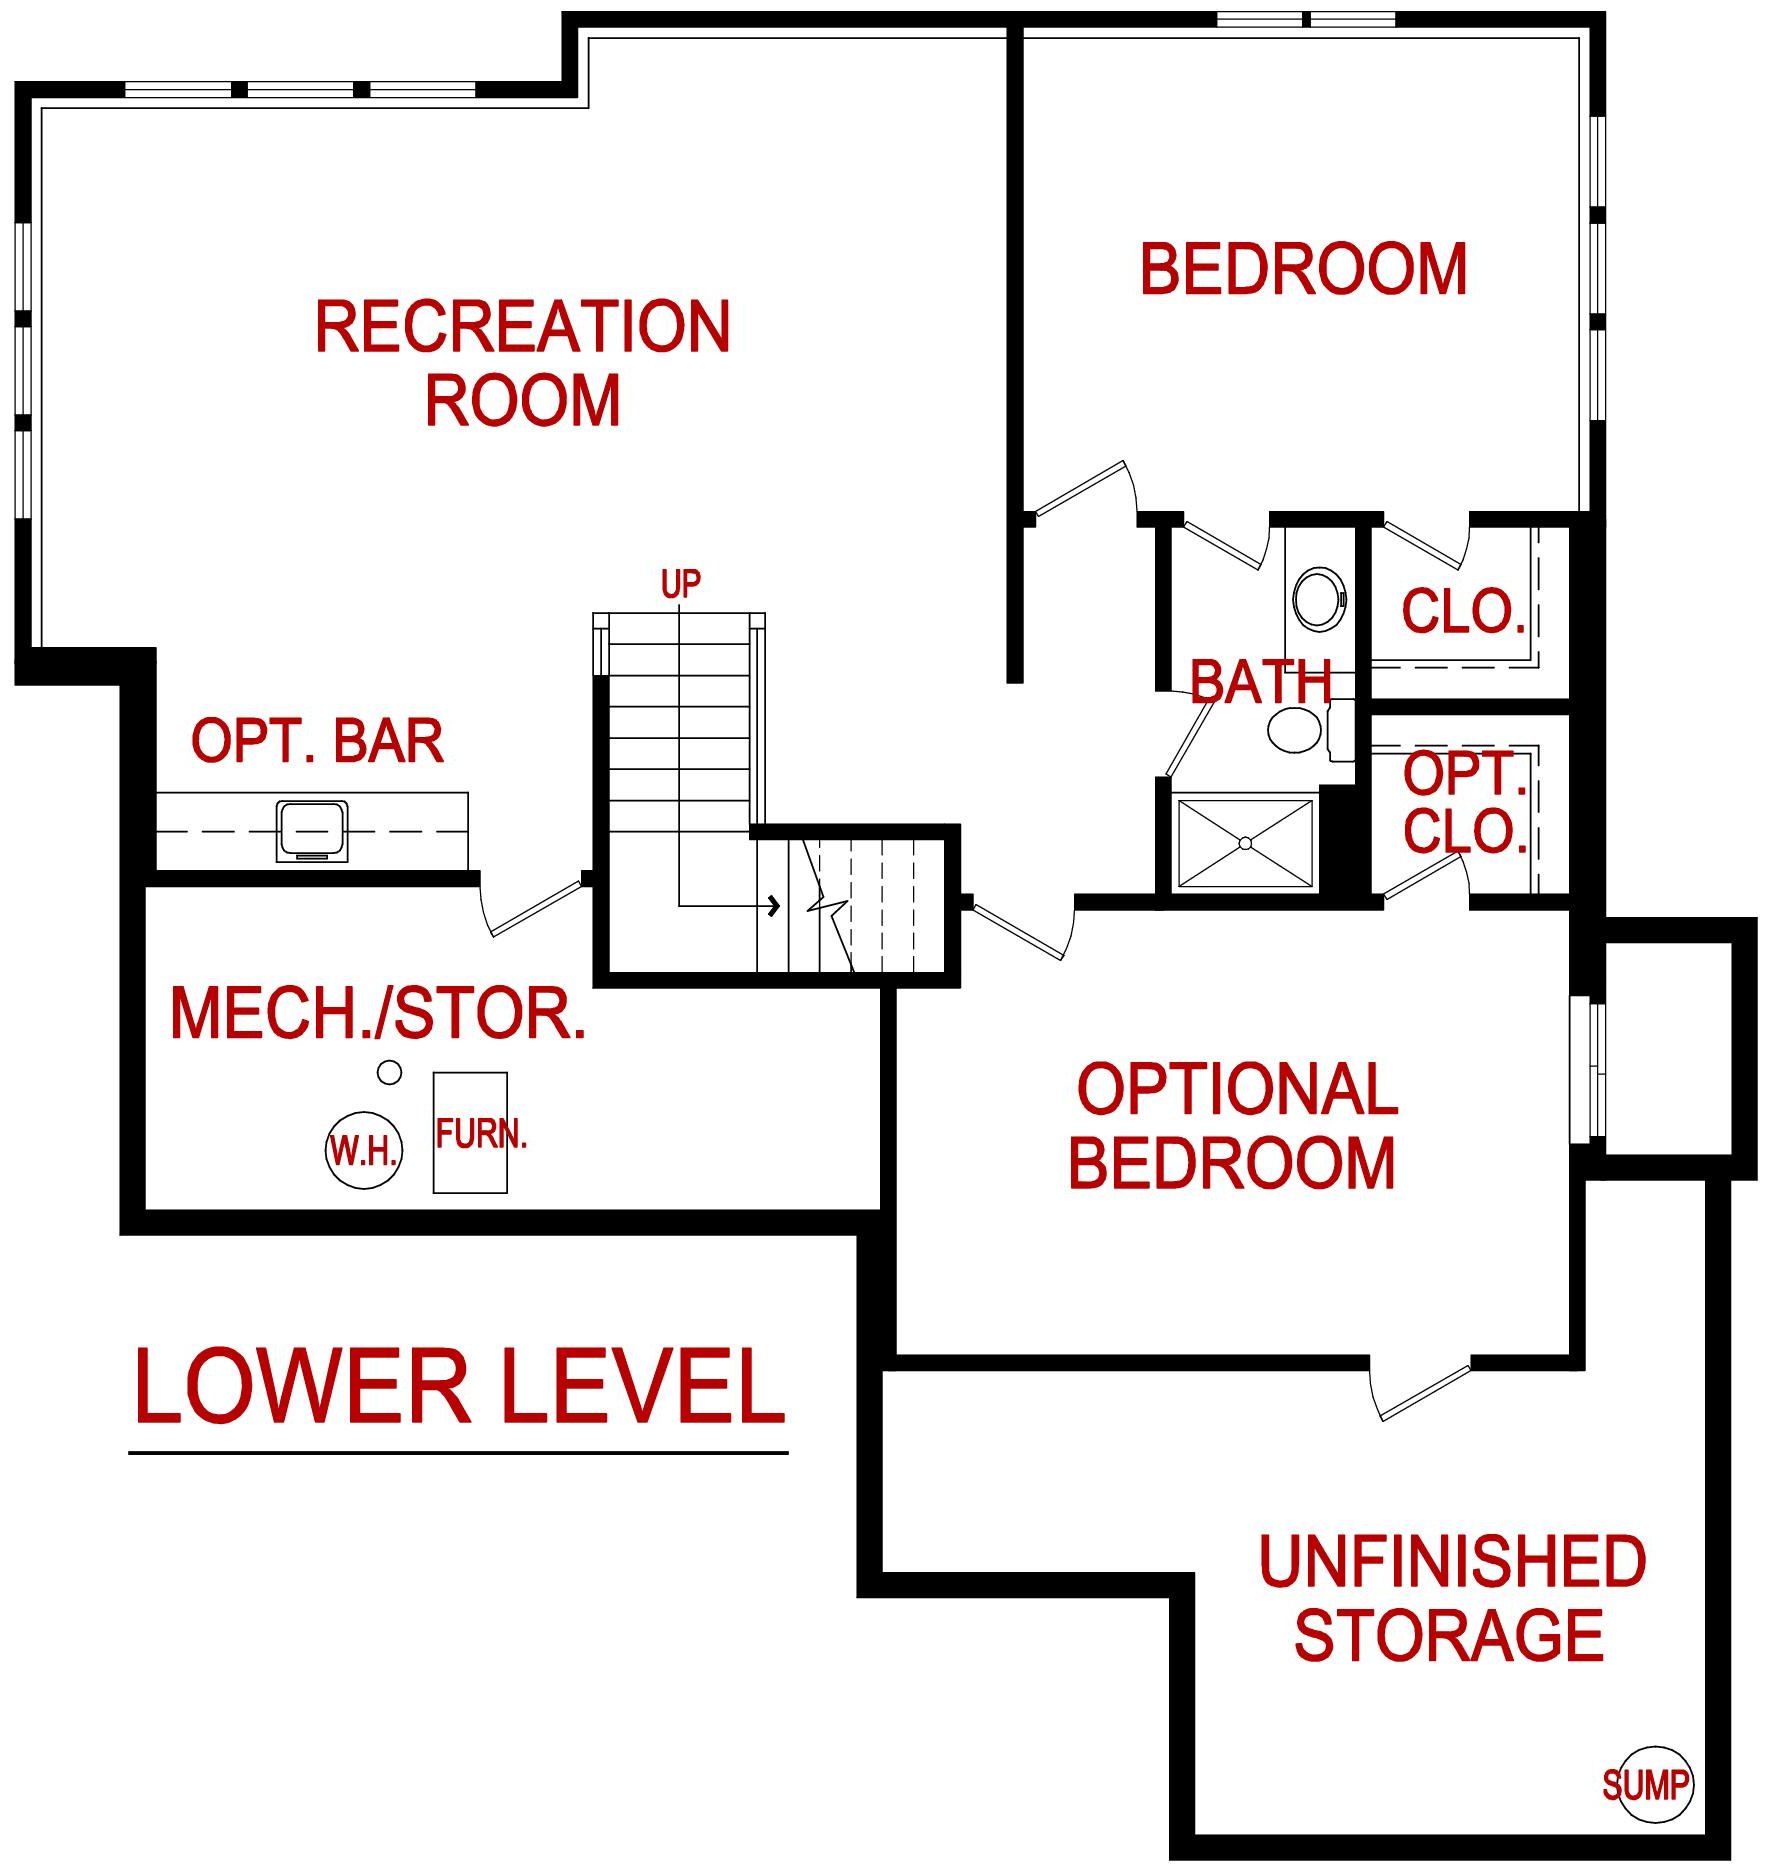 Floorplan of 7433 Ash ST from lambie homes